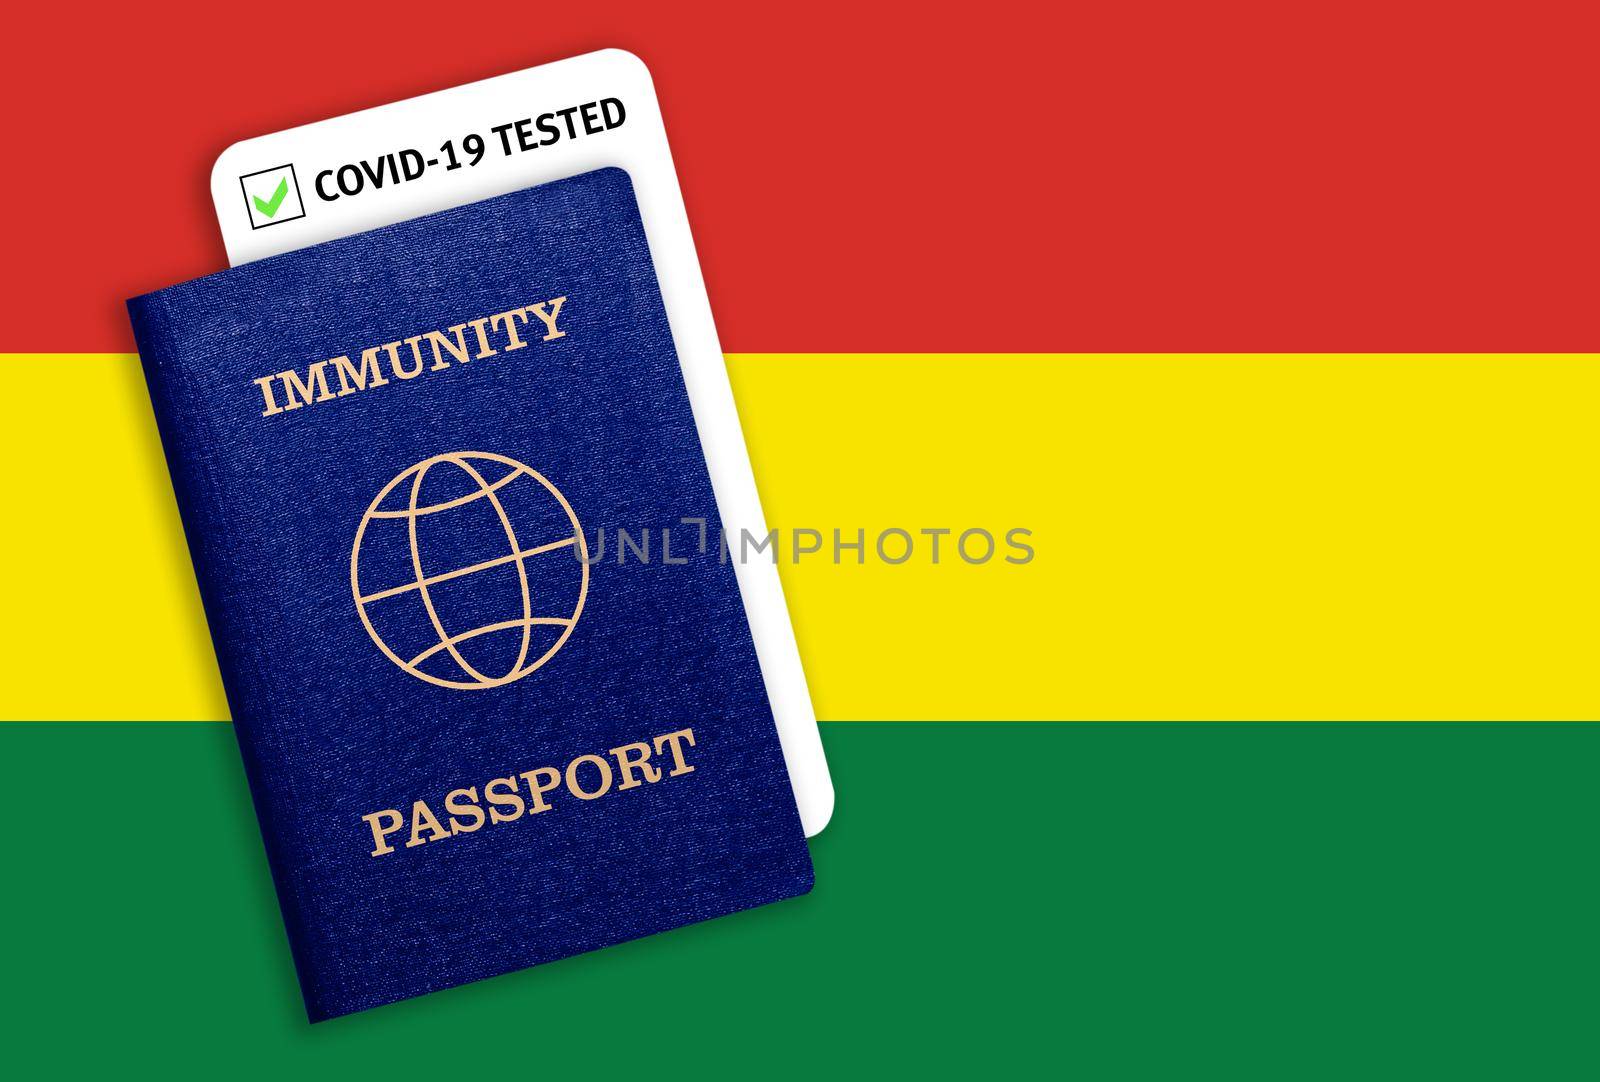 Immunity passport and test result for COVID-19 on flag of Bolivia by galinasharapova